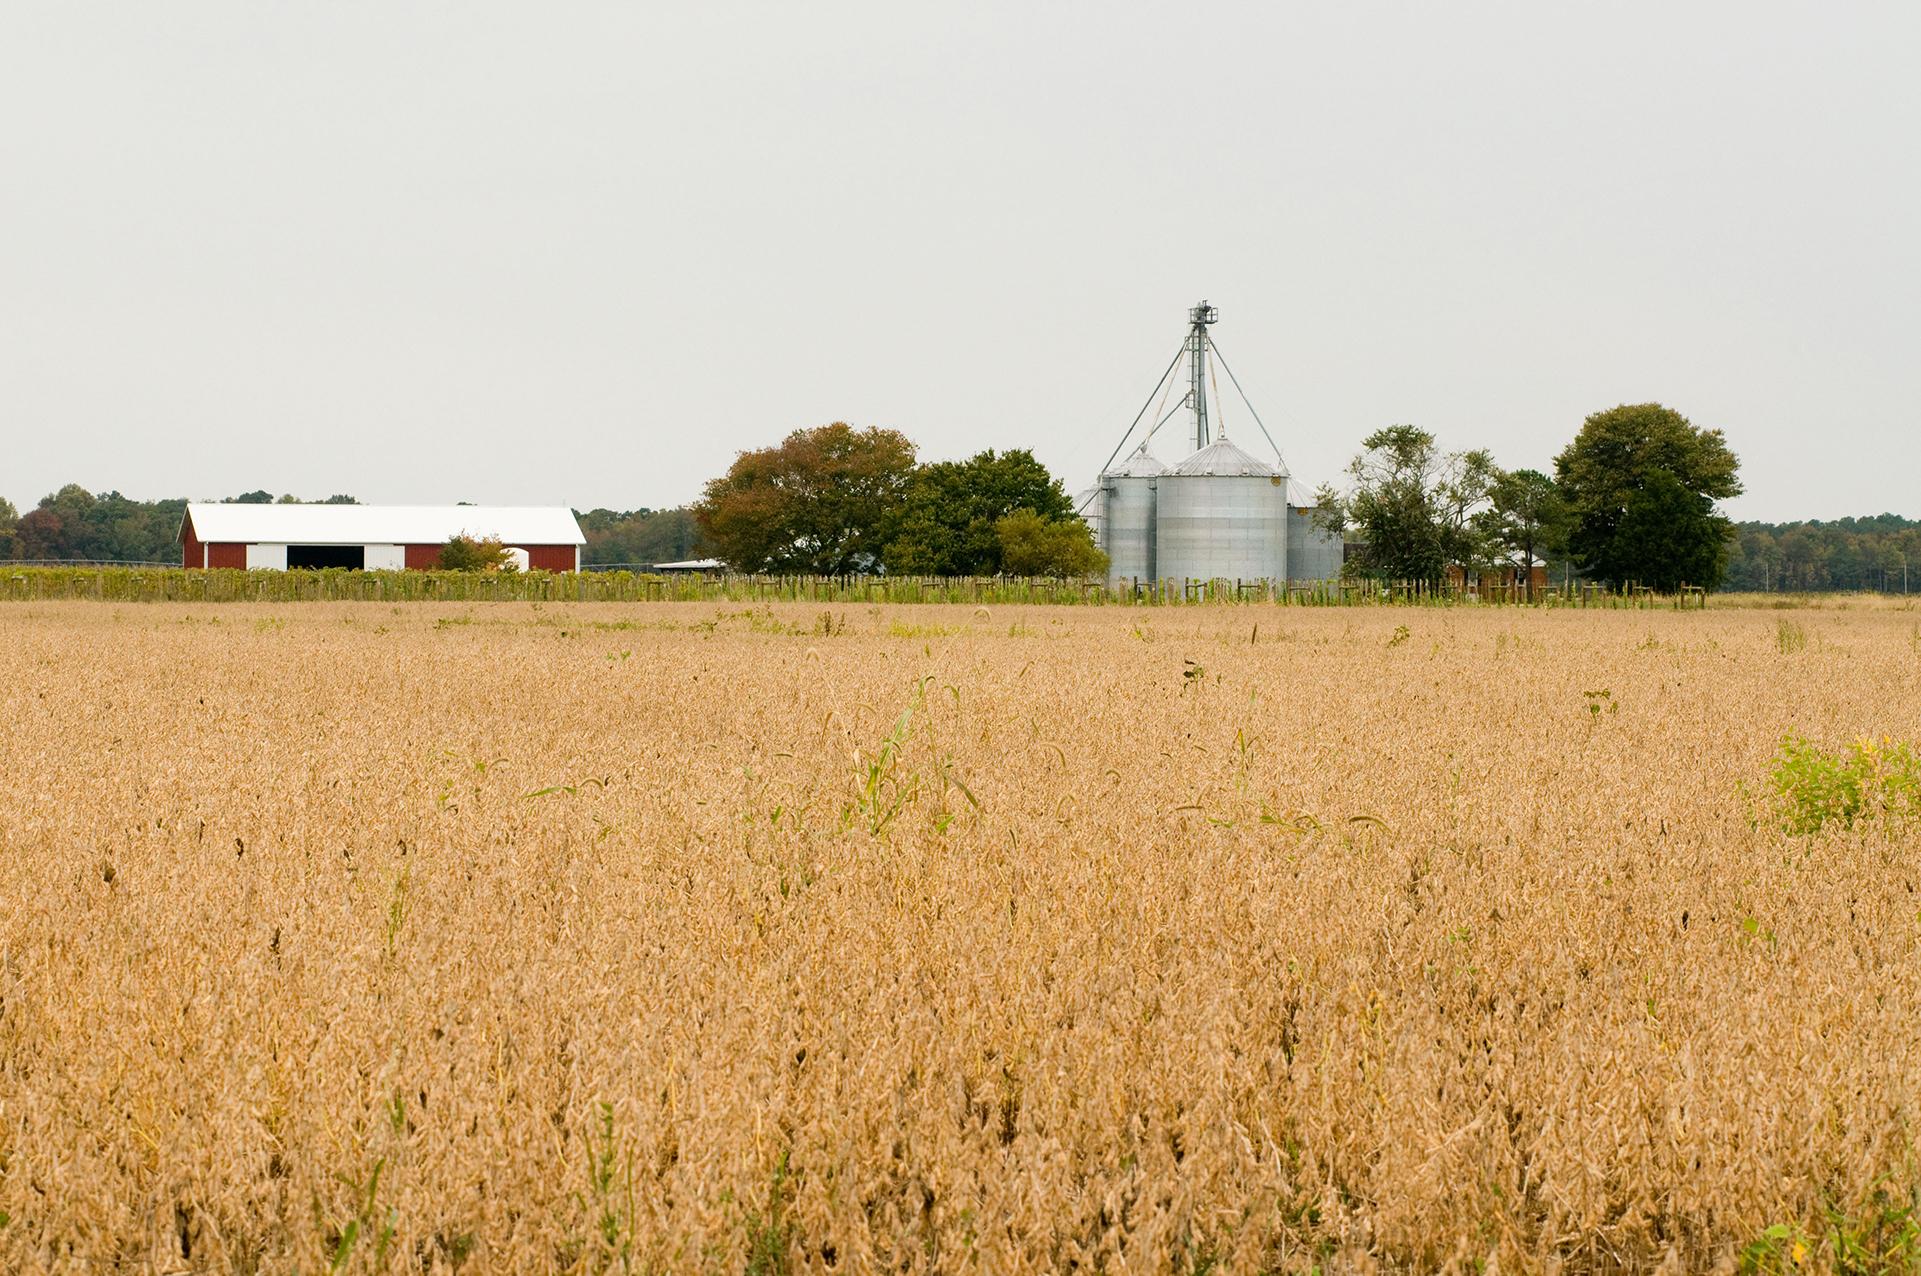 Brown field with grain crops in foreground and red barn and gray silos in background